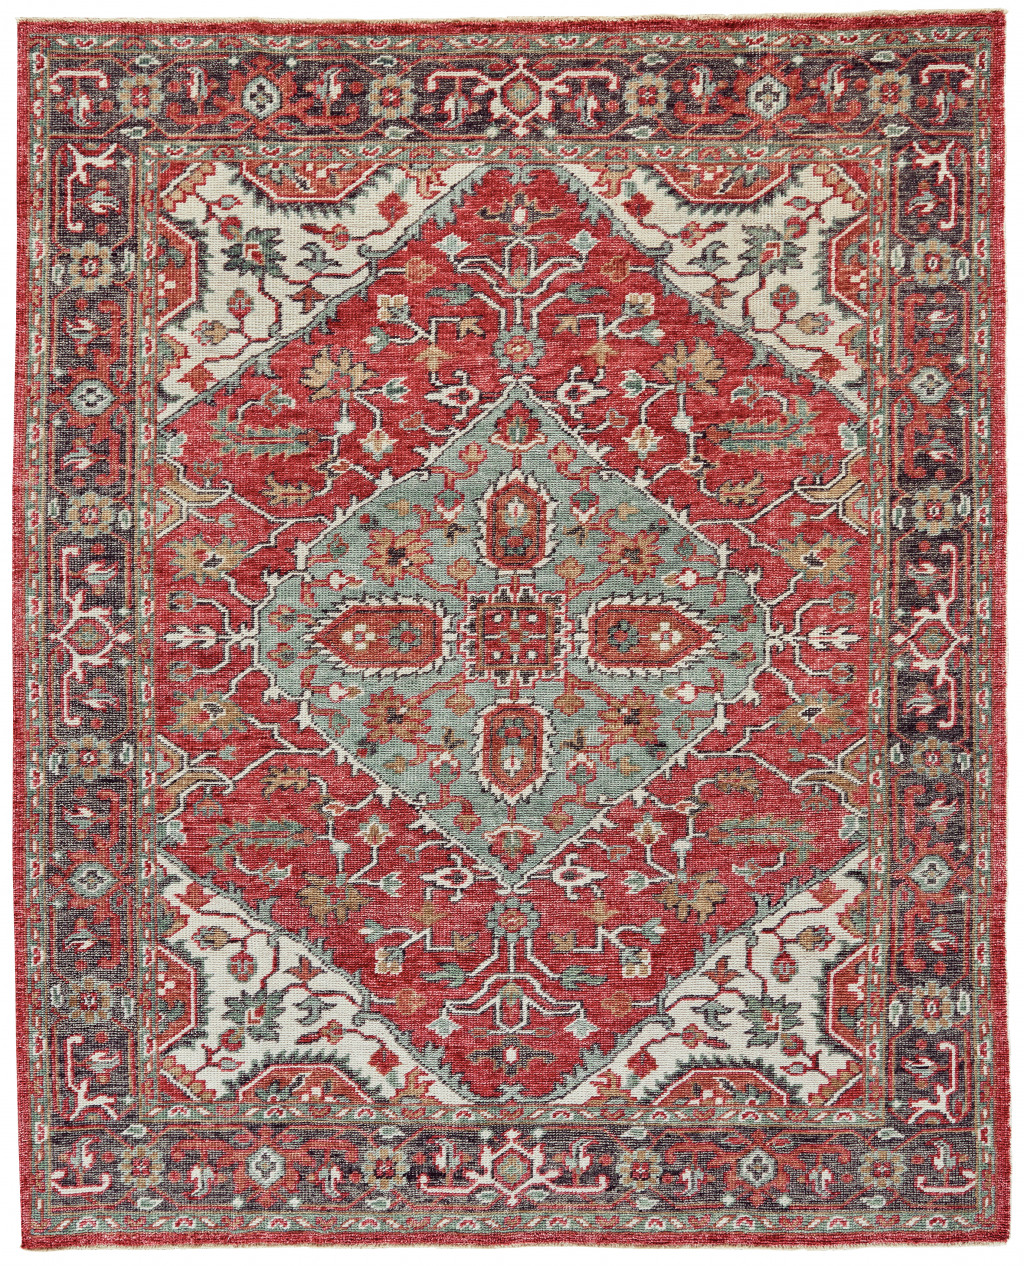 2' X 3' Red Gray And Ivory Wool Floral Hand Knotted Distressed Stain Resistant Area Rug With Fringe-511621-1